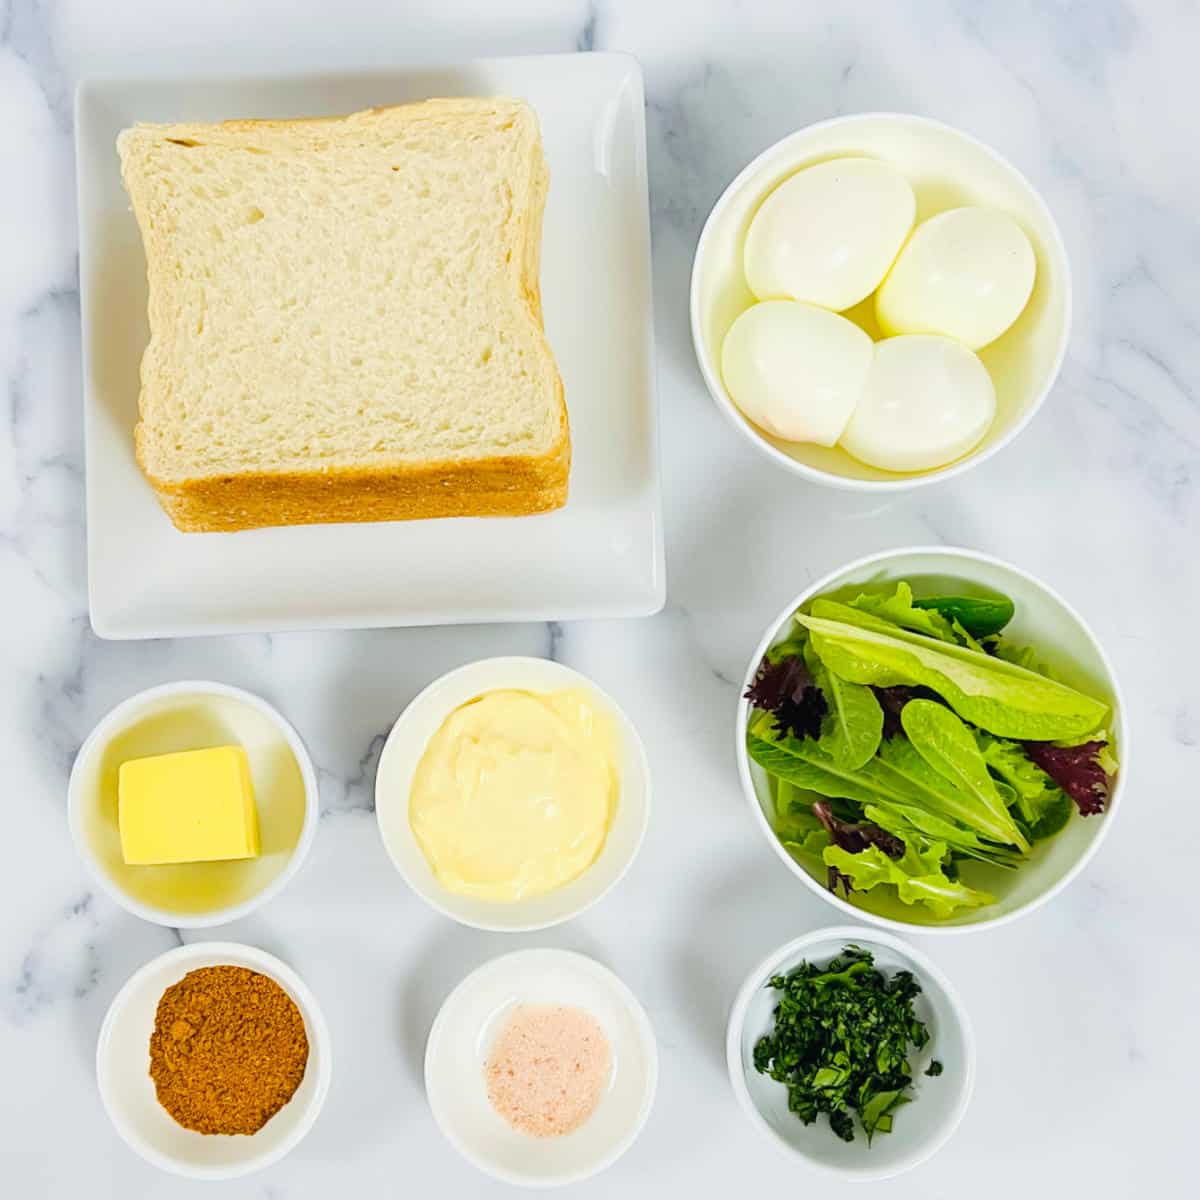 Ingredients to make curried egg mayo sandwich.